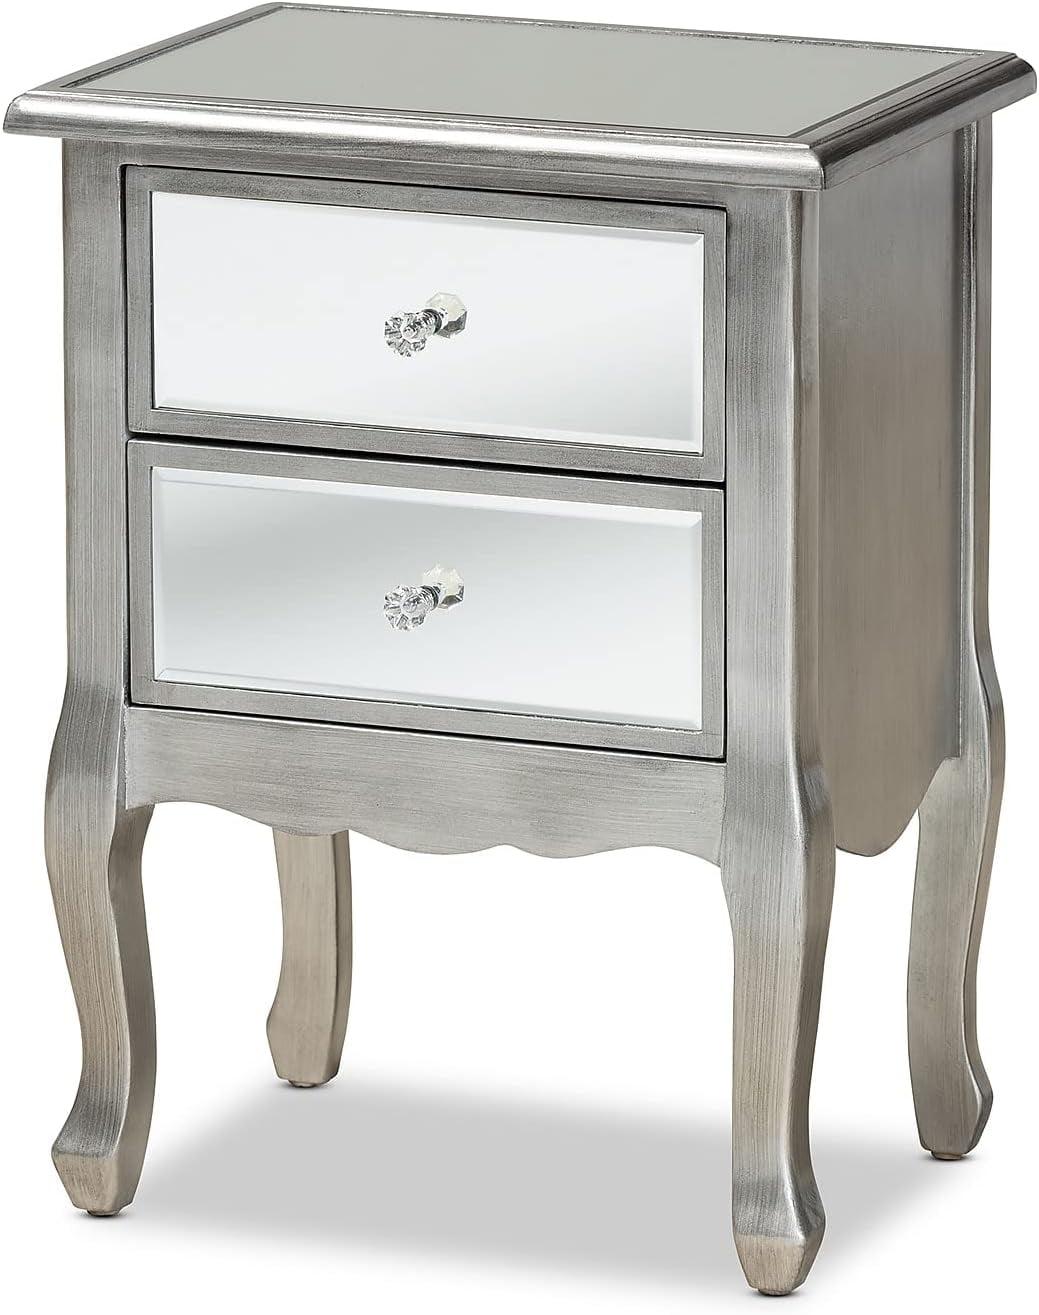 Elegant Mirrored 2-Drawer Nightstand with Crystal Knobs